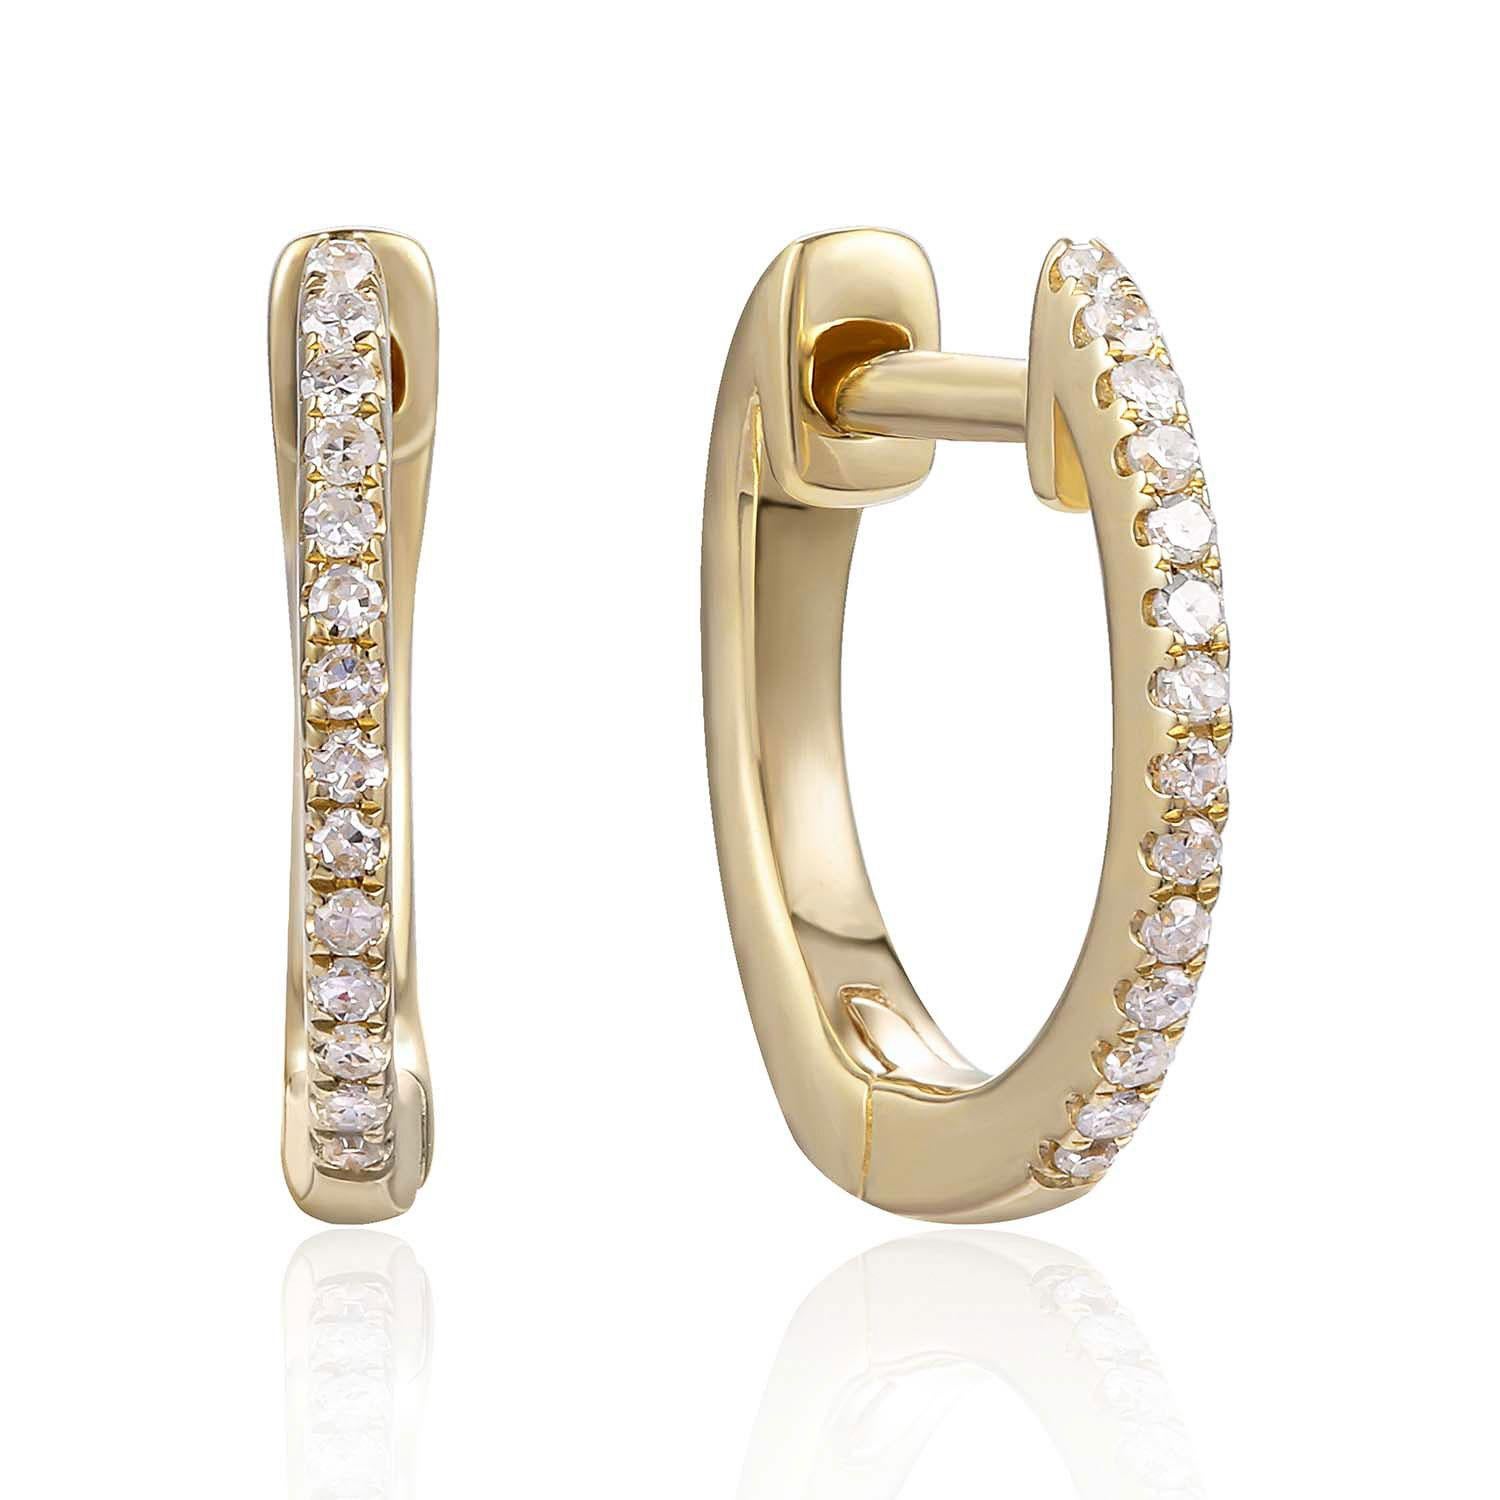 14K Yellow Gold Diamond Earrings featuring 0.06 Carats of Diamonds

Underline your look with this sharp 14K Yellow gold shape Diamond Earrings. High quality Diamonds. This Earrings will underline your exquisite look for any occasion.

. is a leading